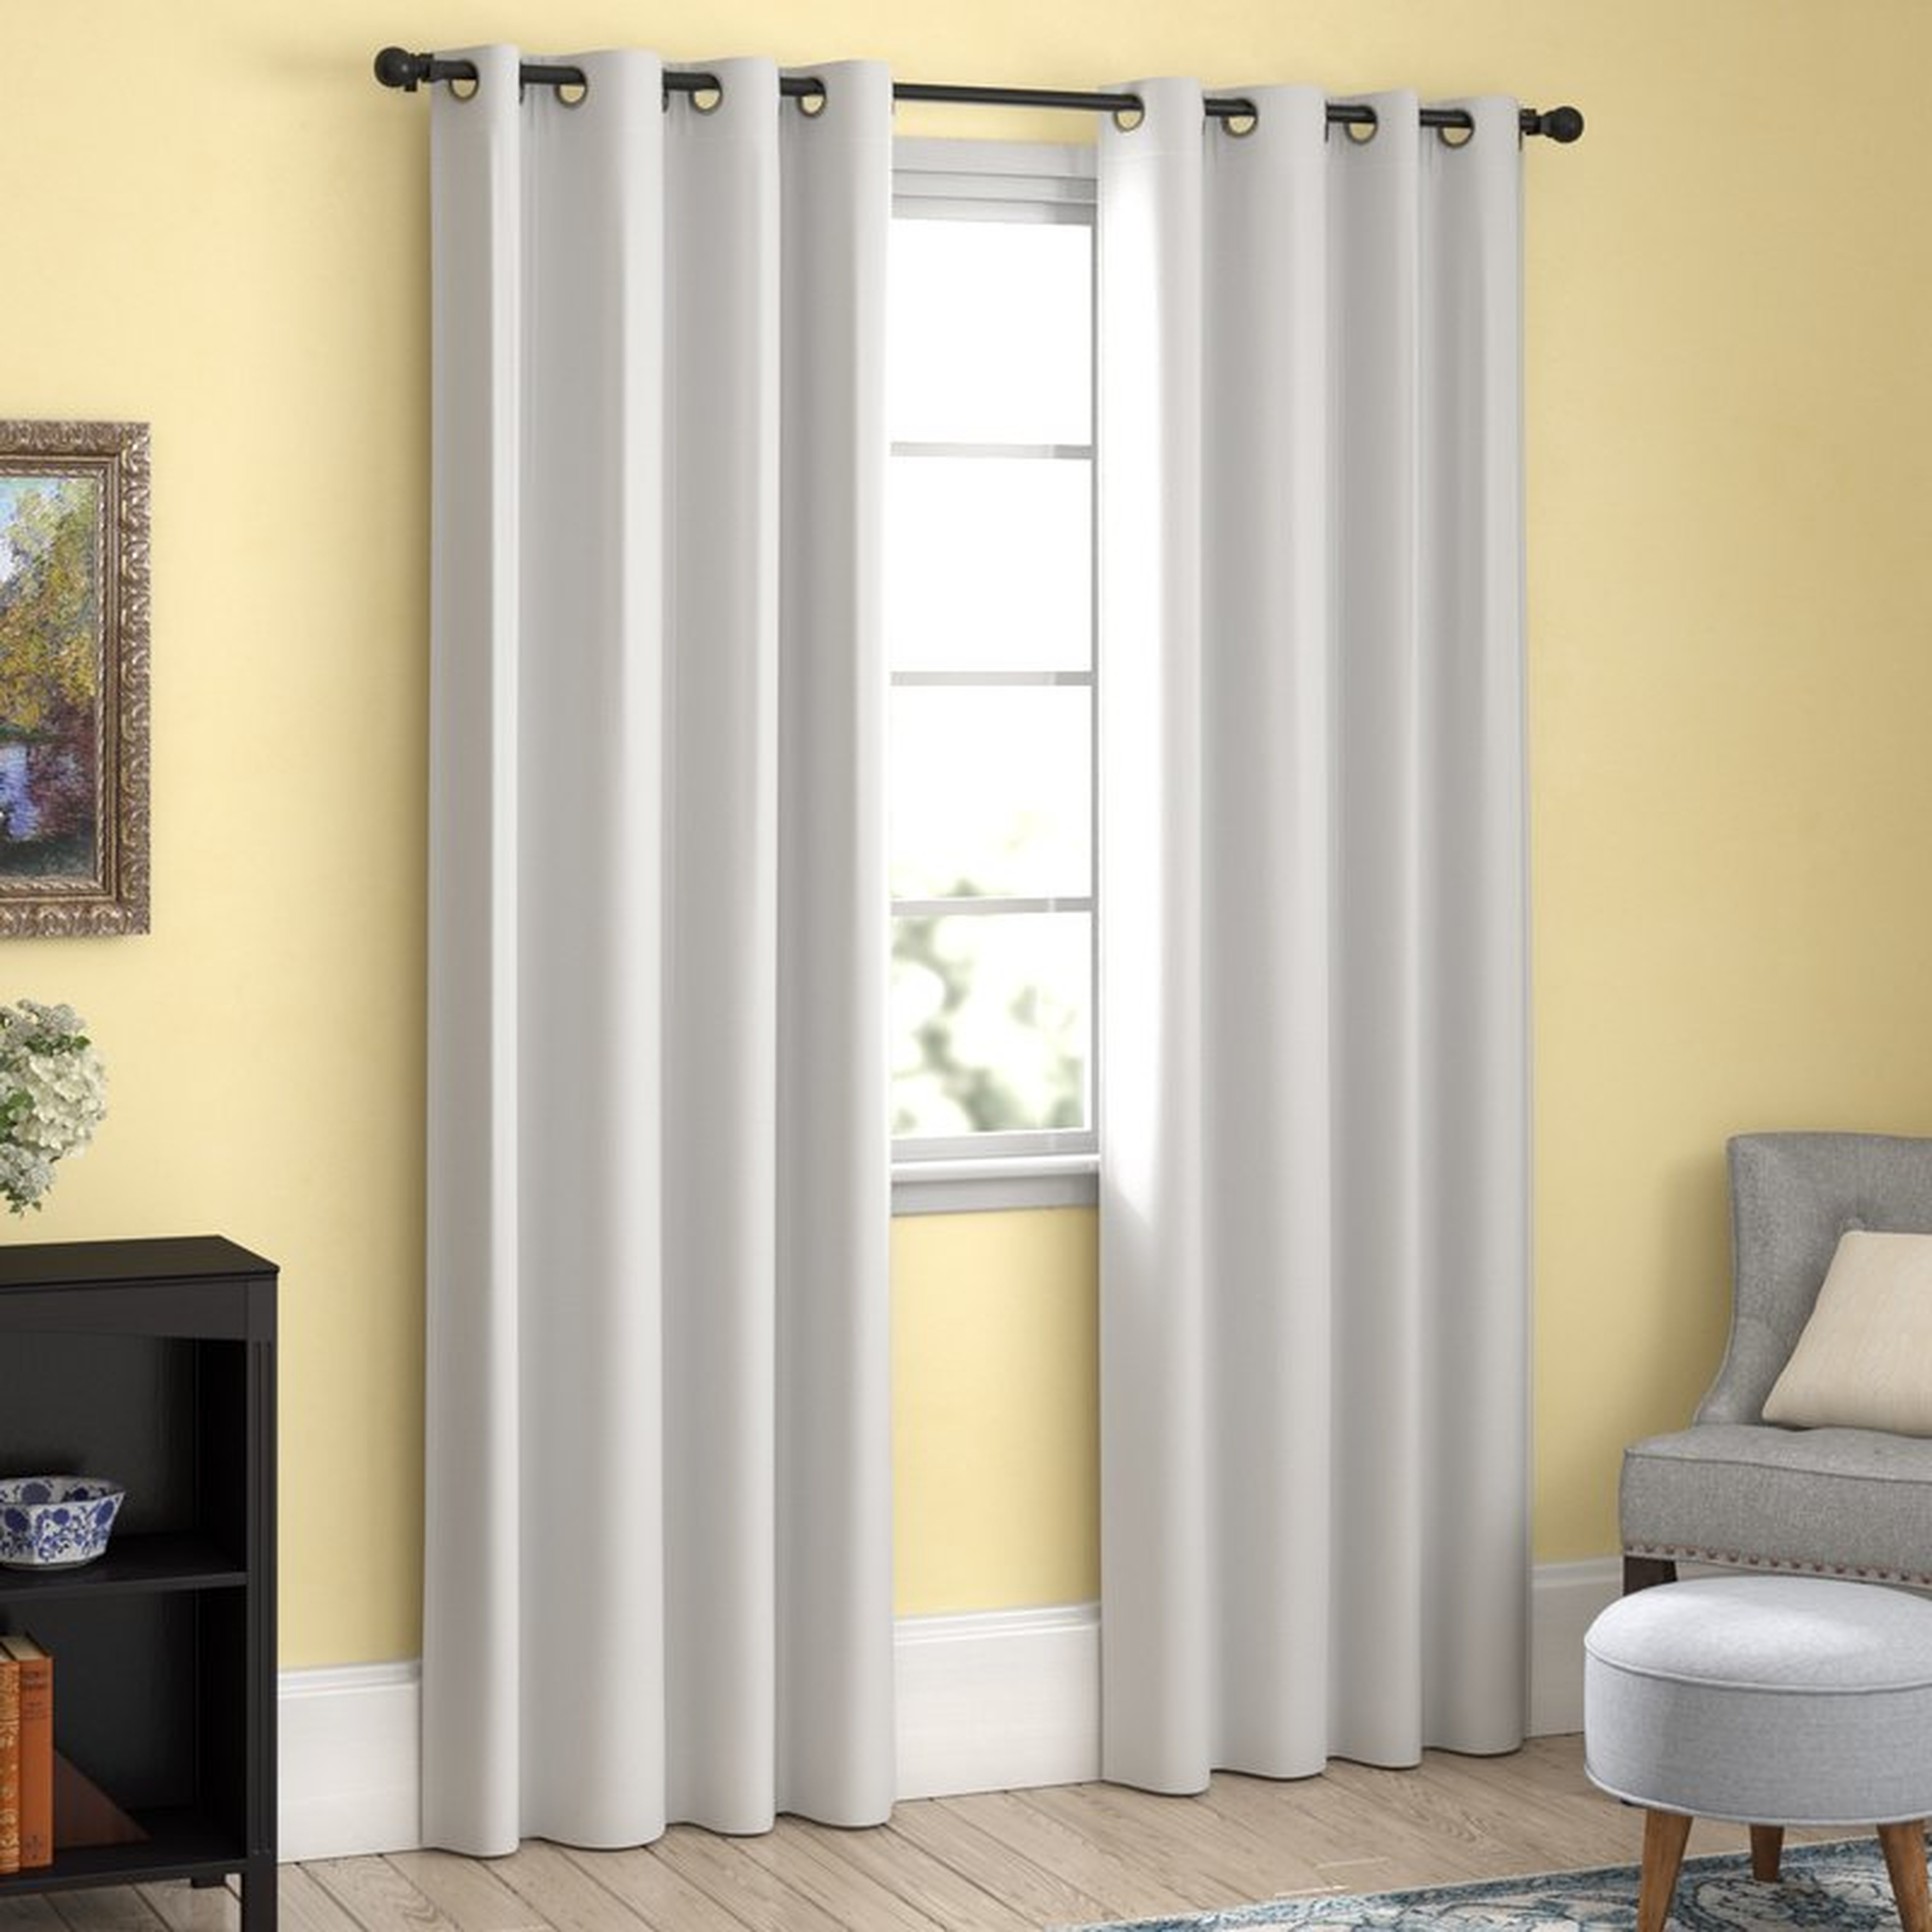 Hosler Insulated Lined Solid Blackout Thermal Grommet Curtain Panels (Set of 2) - Wayfair